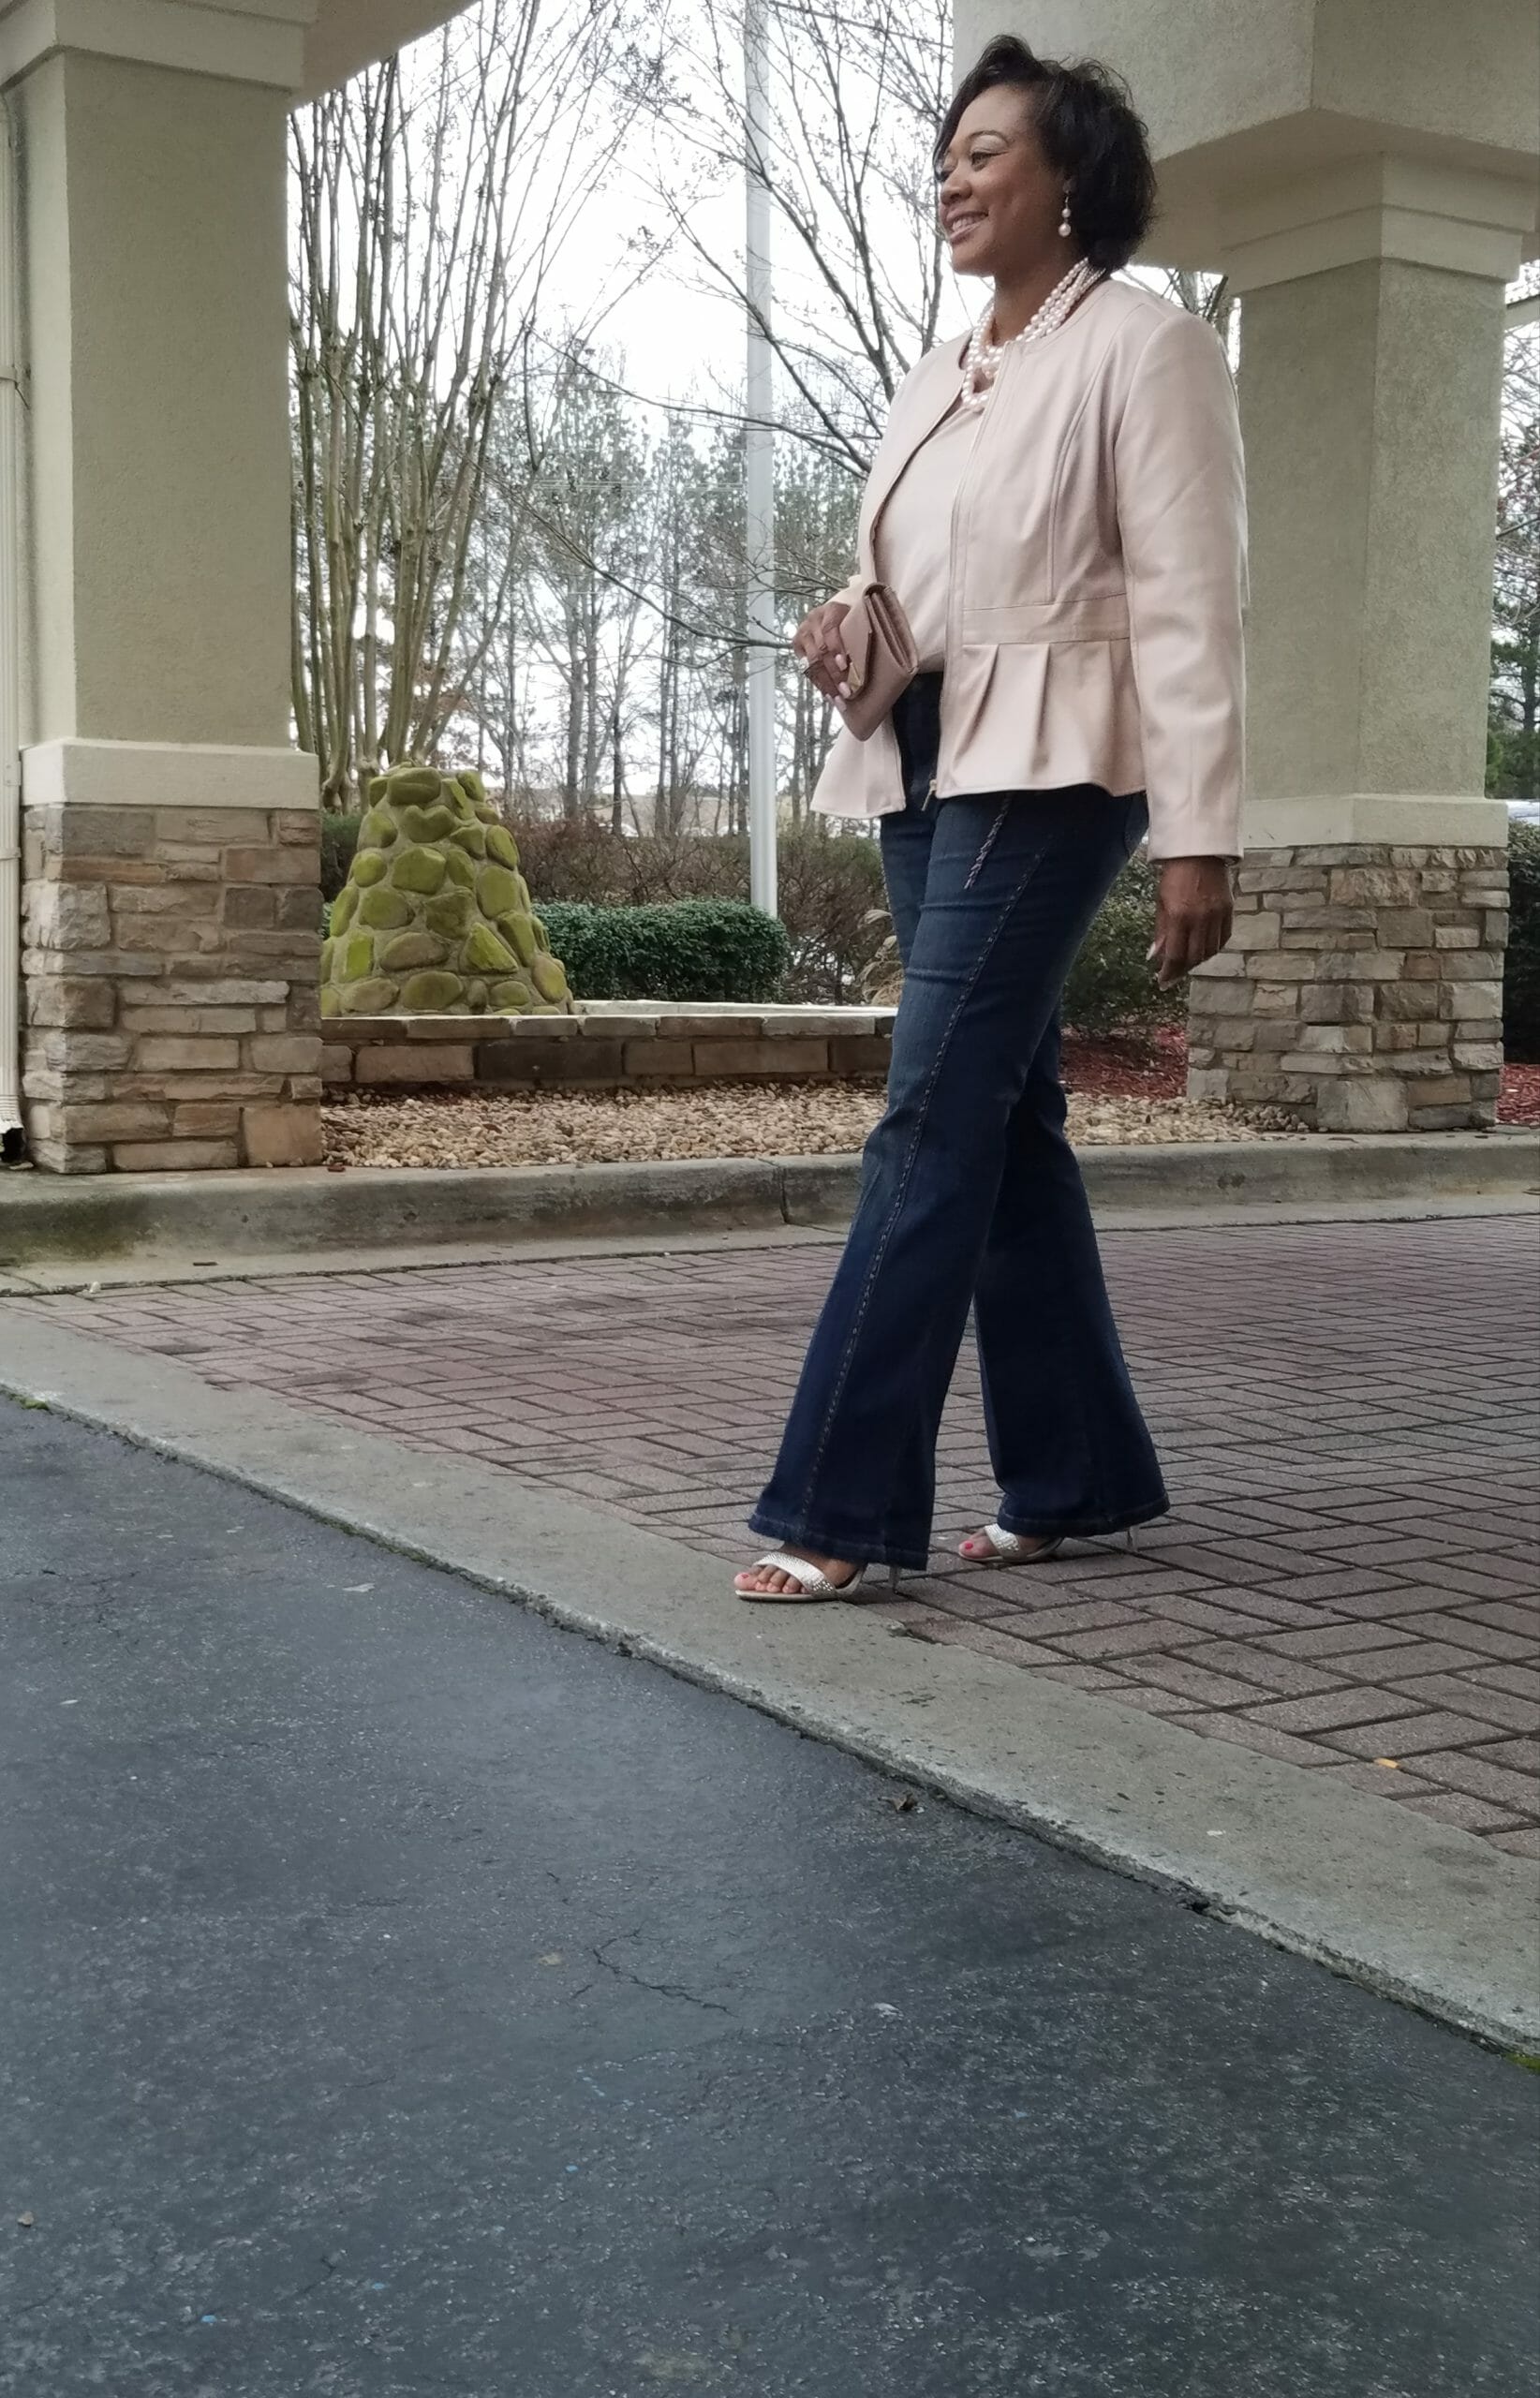 A Midnight Velvet customer outside in a blush top and peplum jacket set, jeans, sandals, and a pearl necklace.